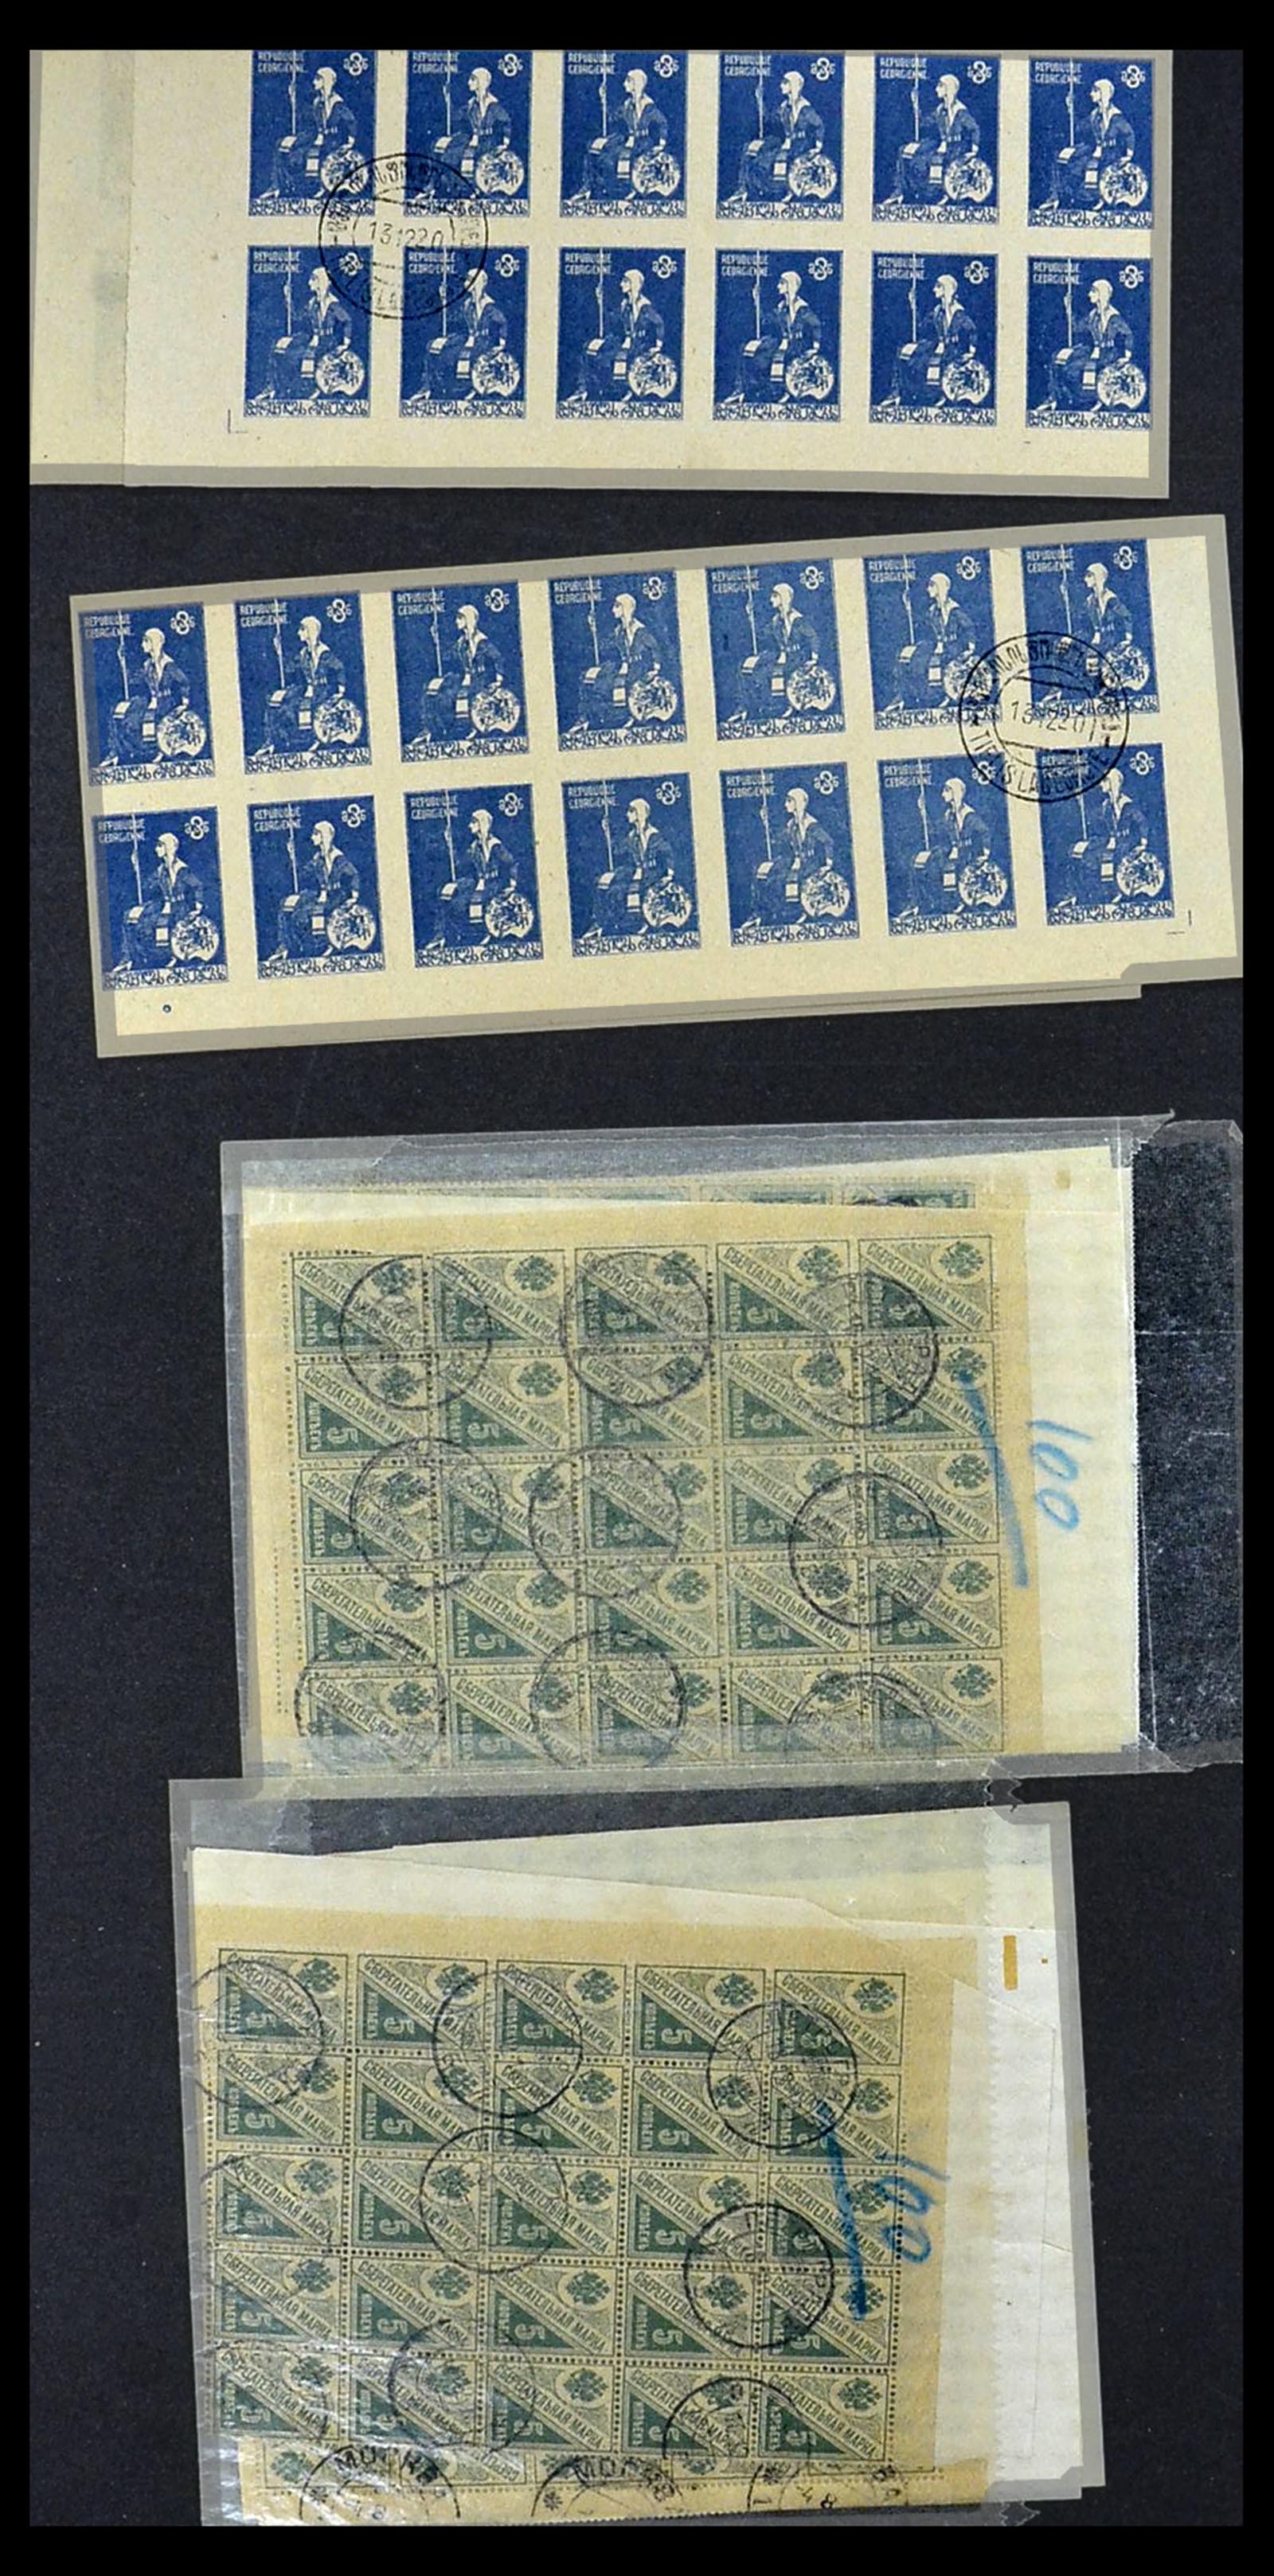 34254 075 - Stamp collection 34254 Georgia 1919.